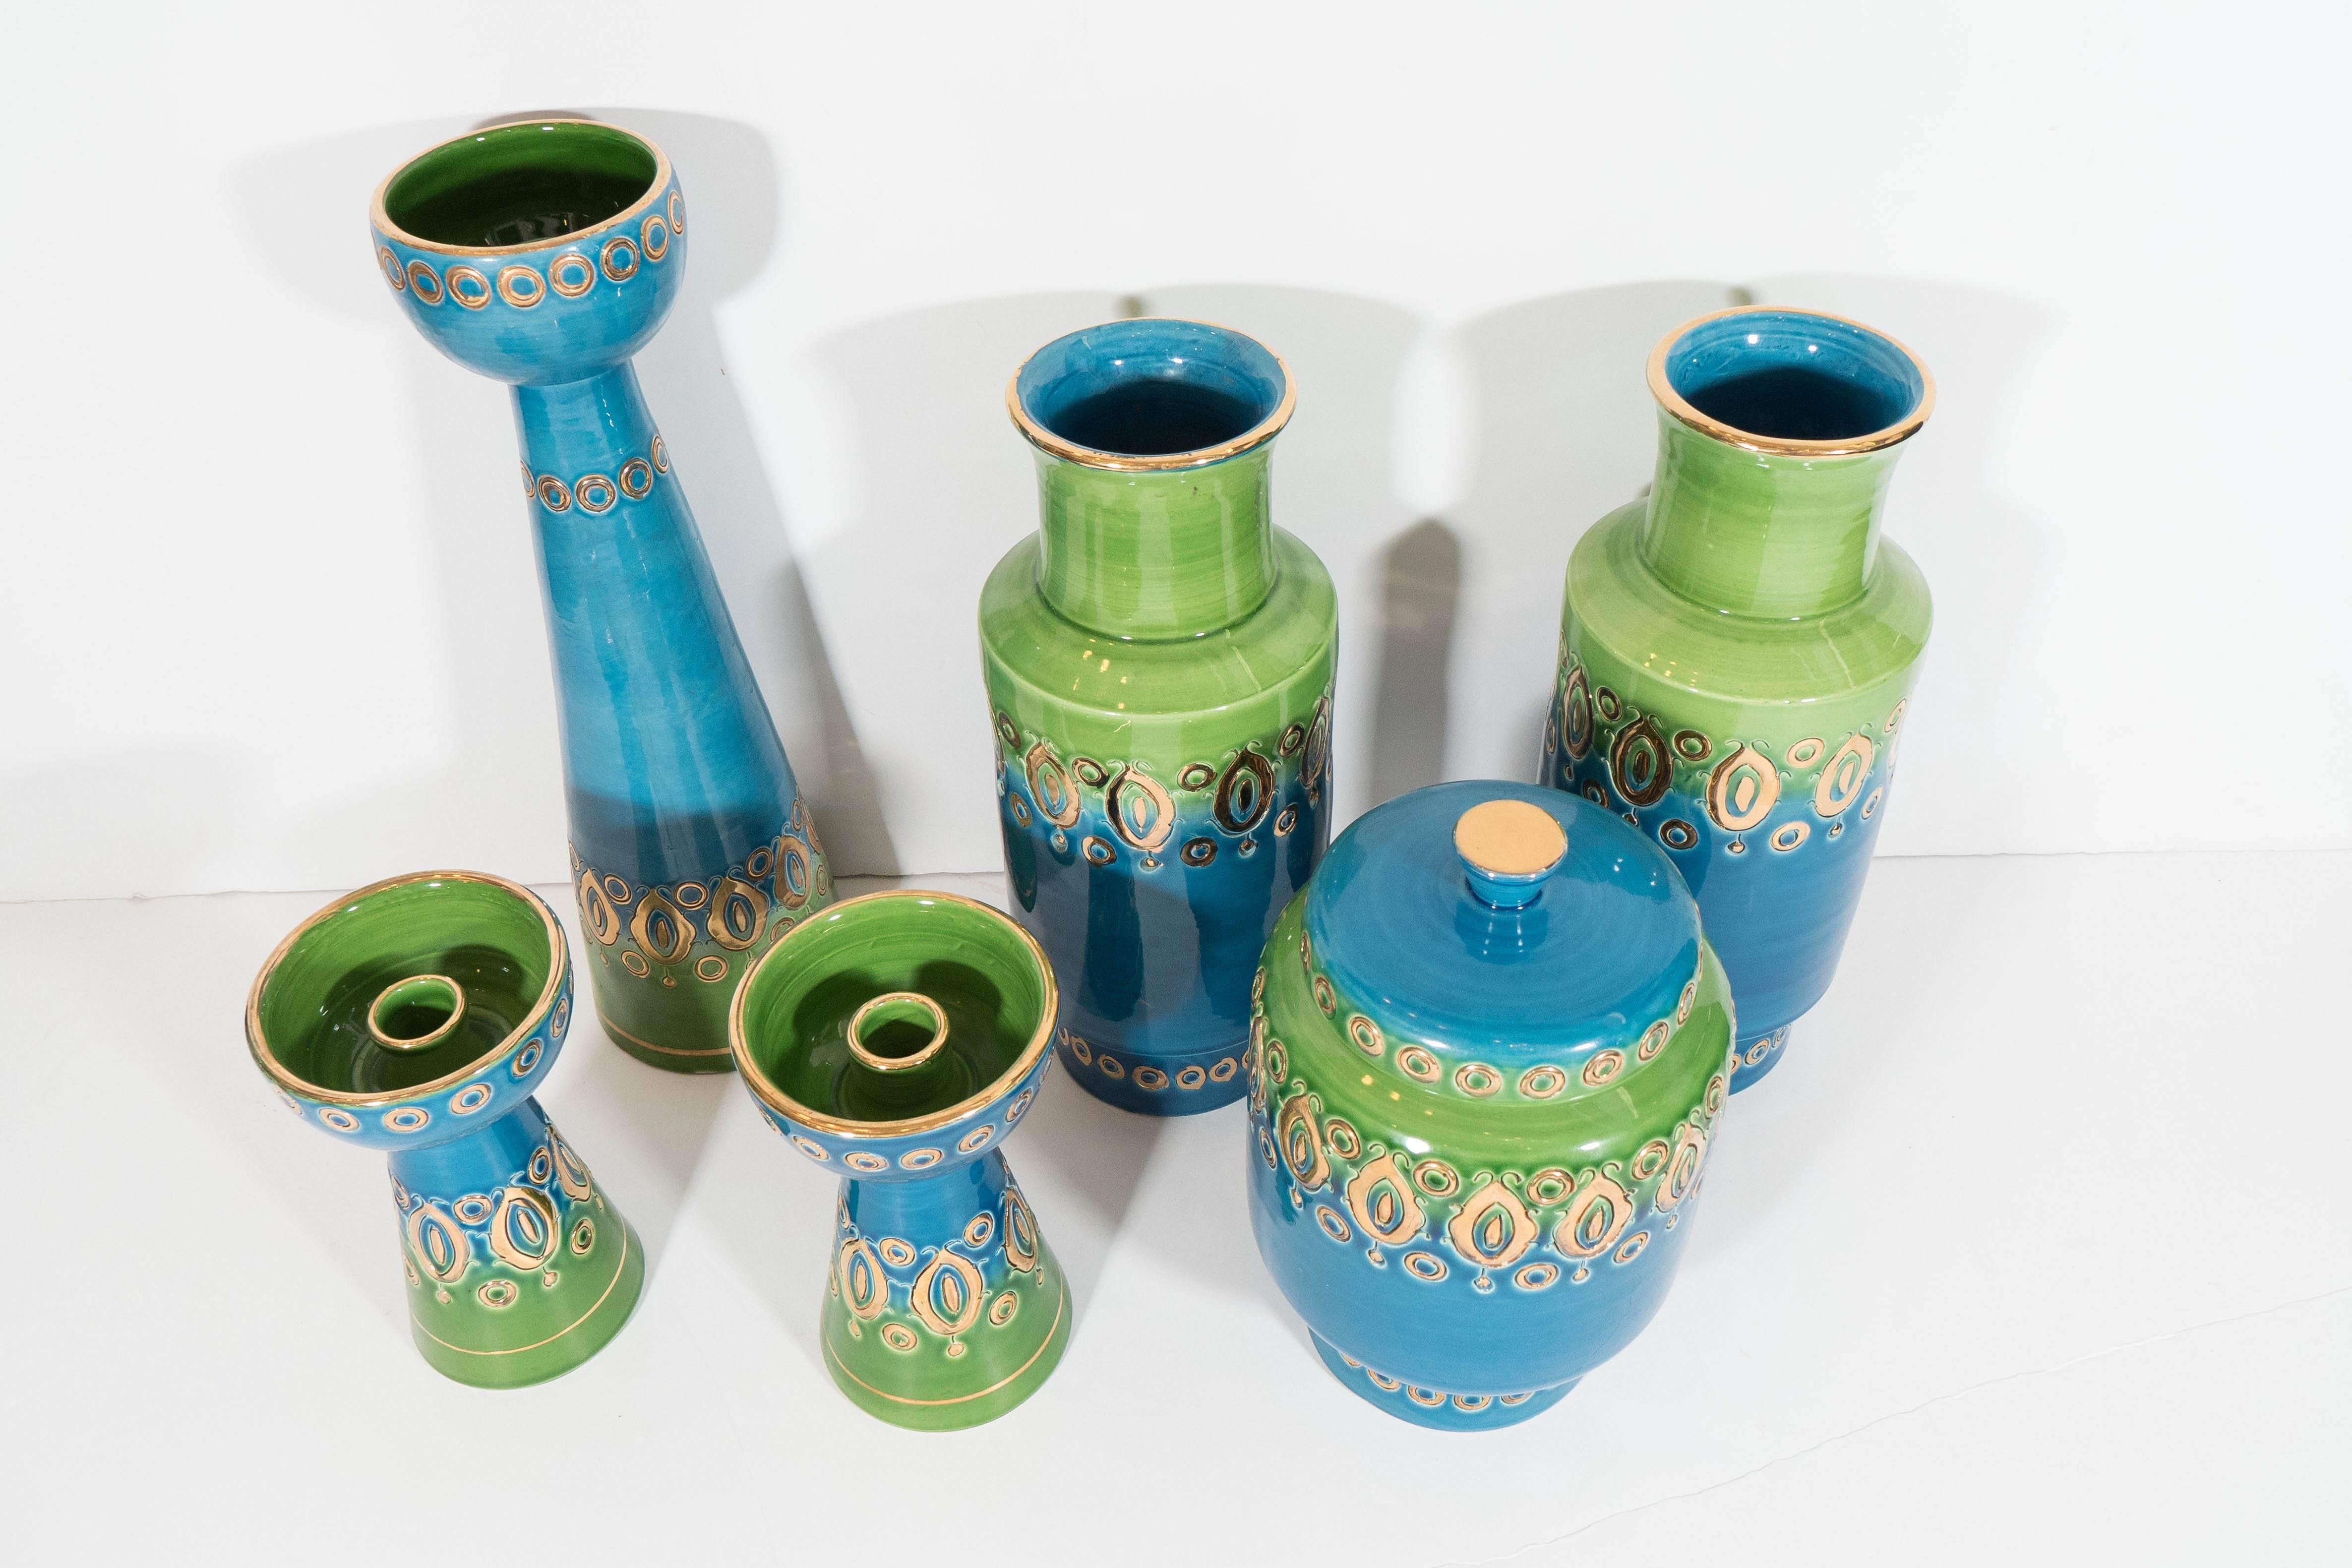 Set of vintage glazed ceramic objects, made by Bitossi during the 1960s and imported by Rosenthal-Netter, including a tall candleholder, a pair of vases, a lidded jar and two small candleholders; each piece is glazed in brilliant blue and green,